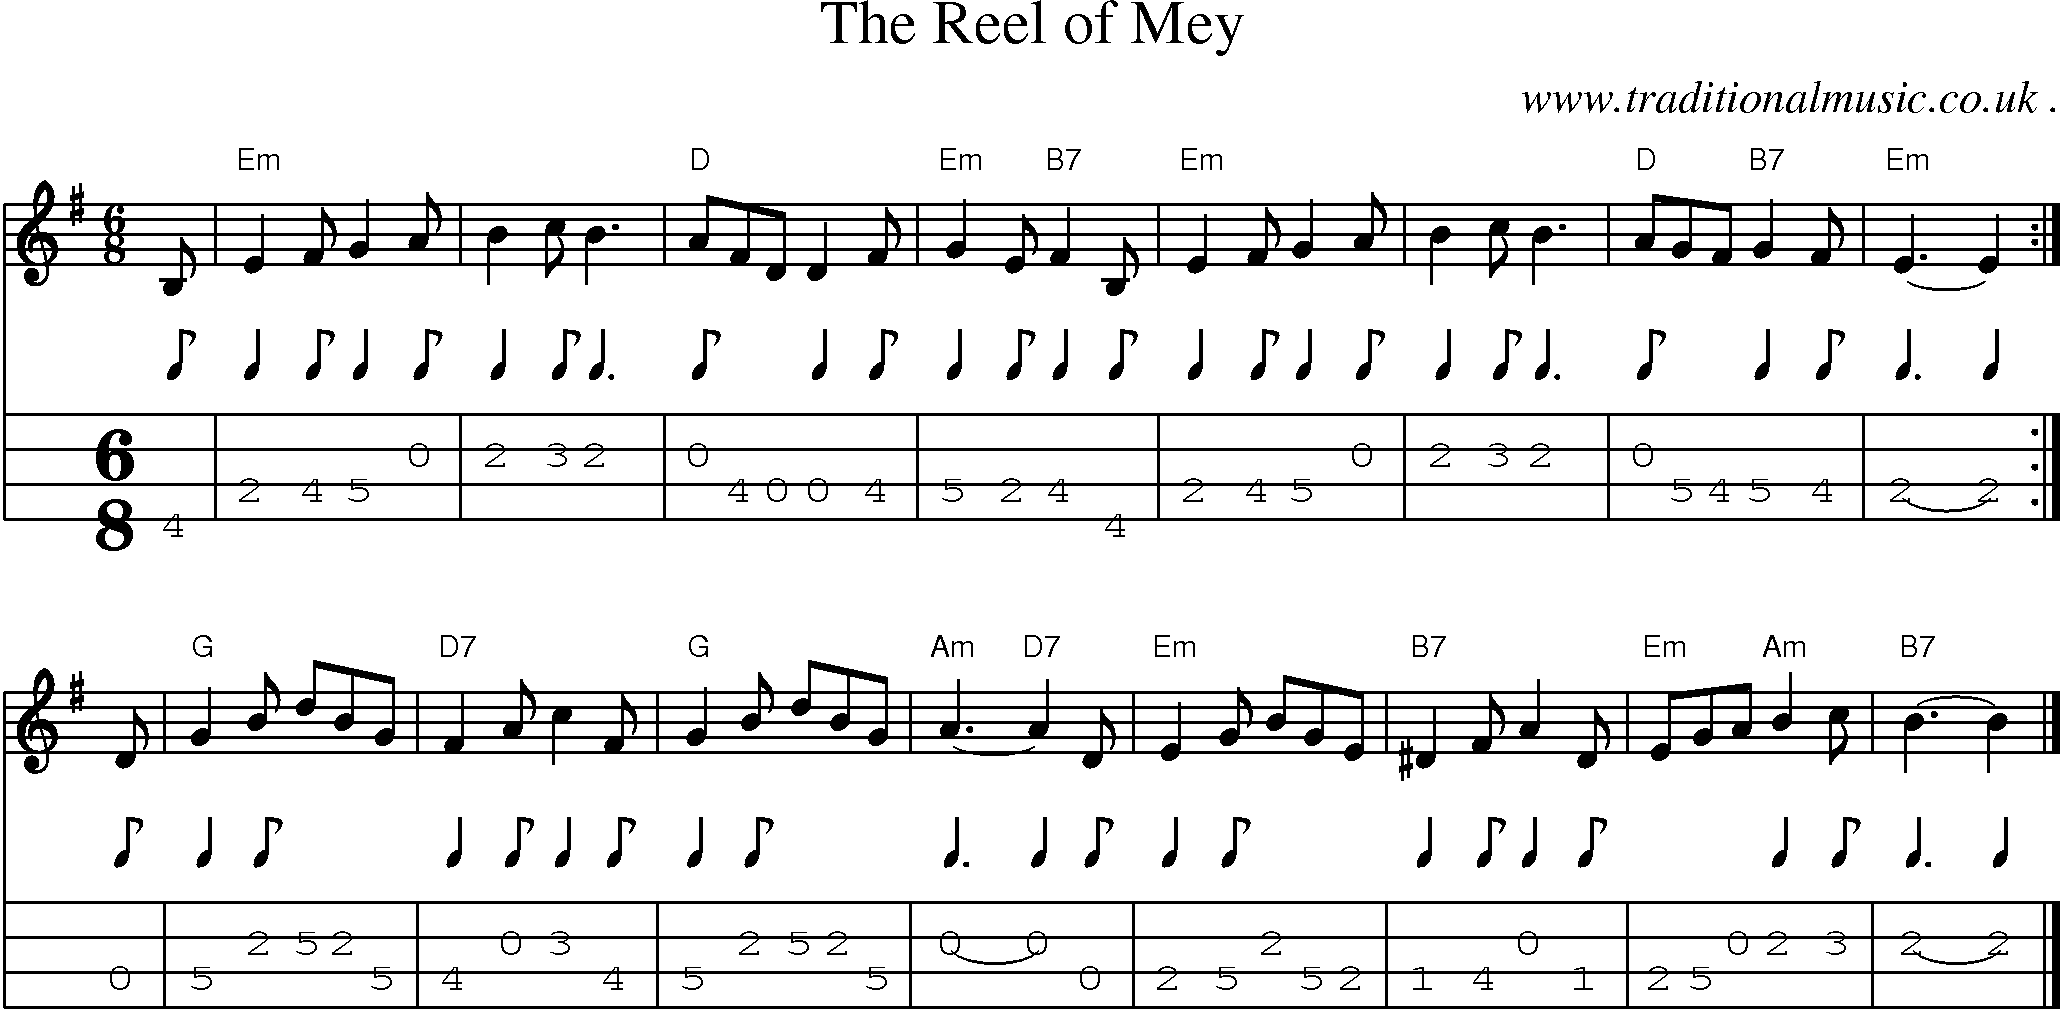 Sheet-music  score, Chords and Mandolin Tabs for The Reel Of Mey